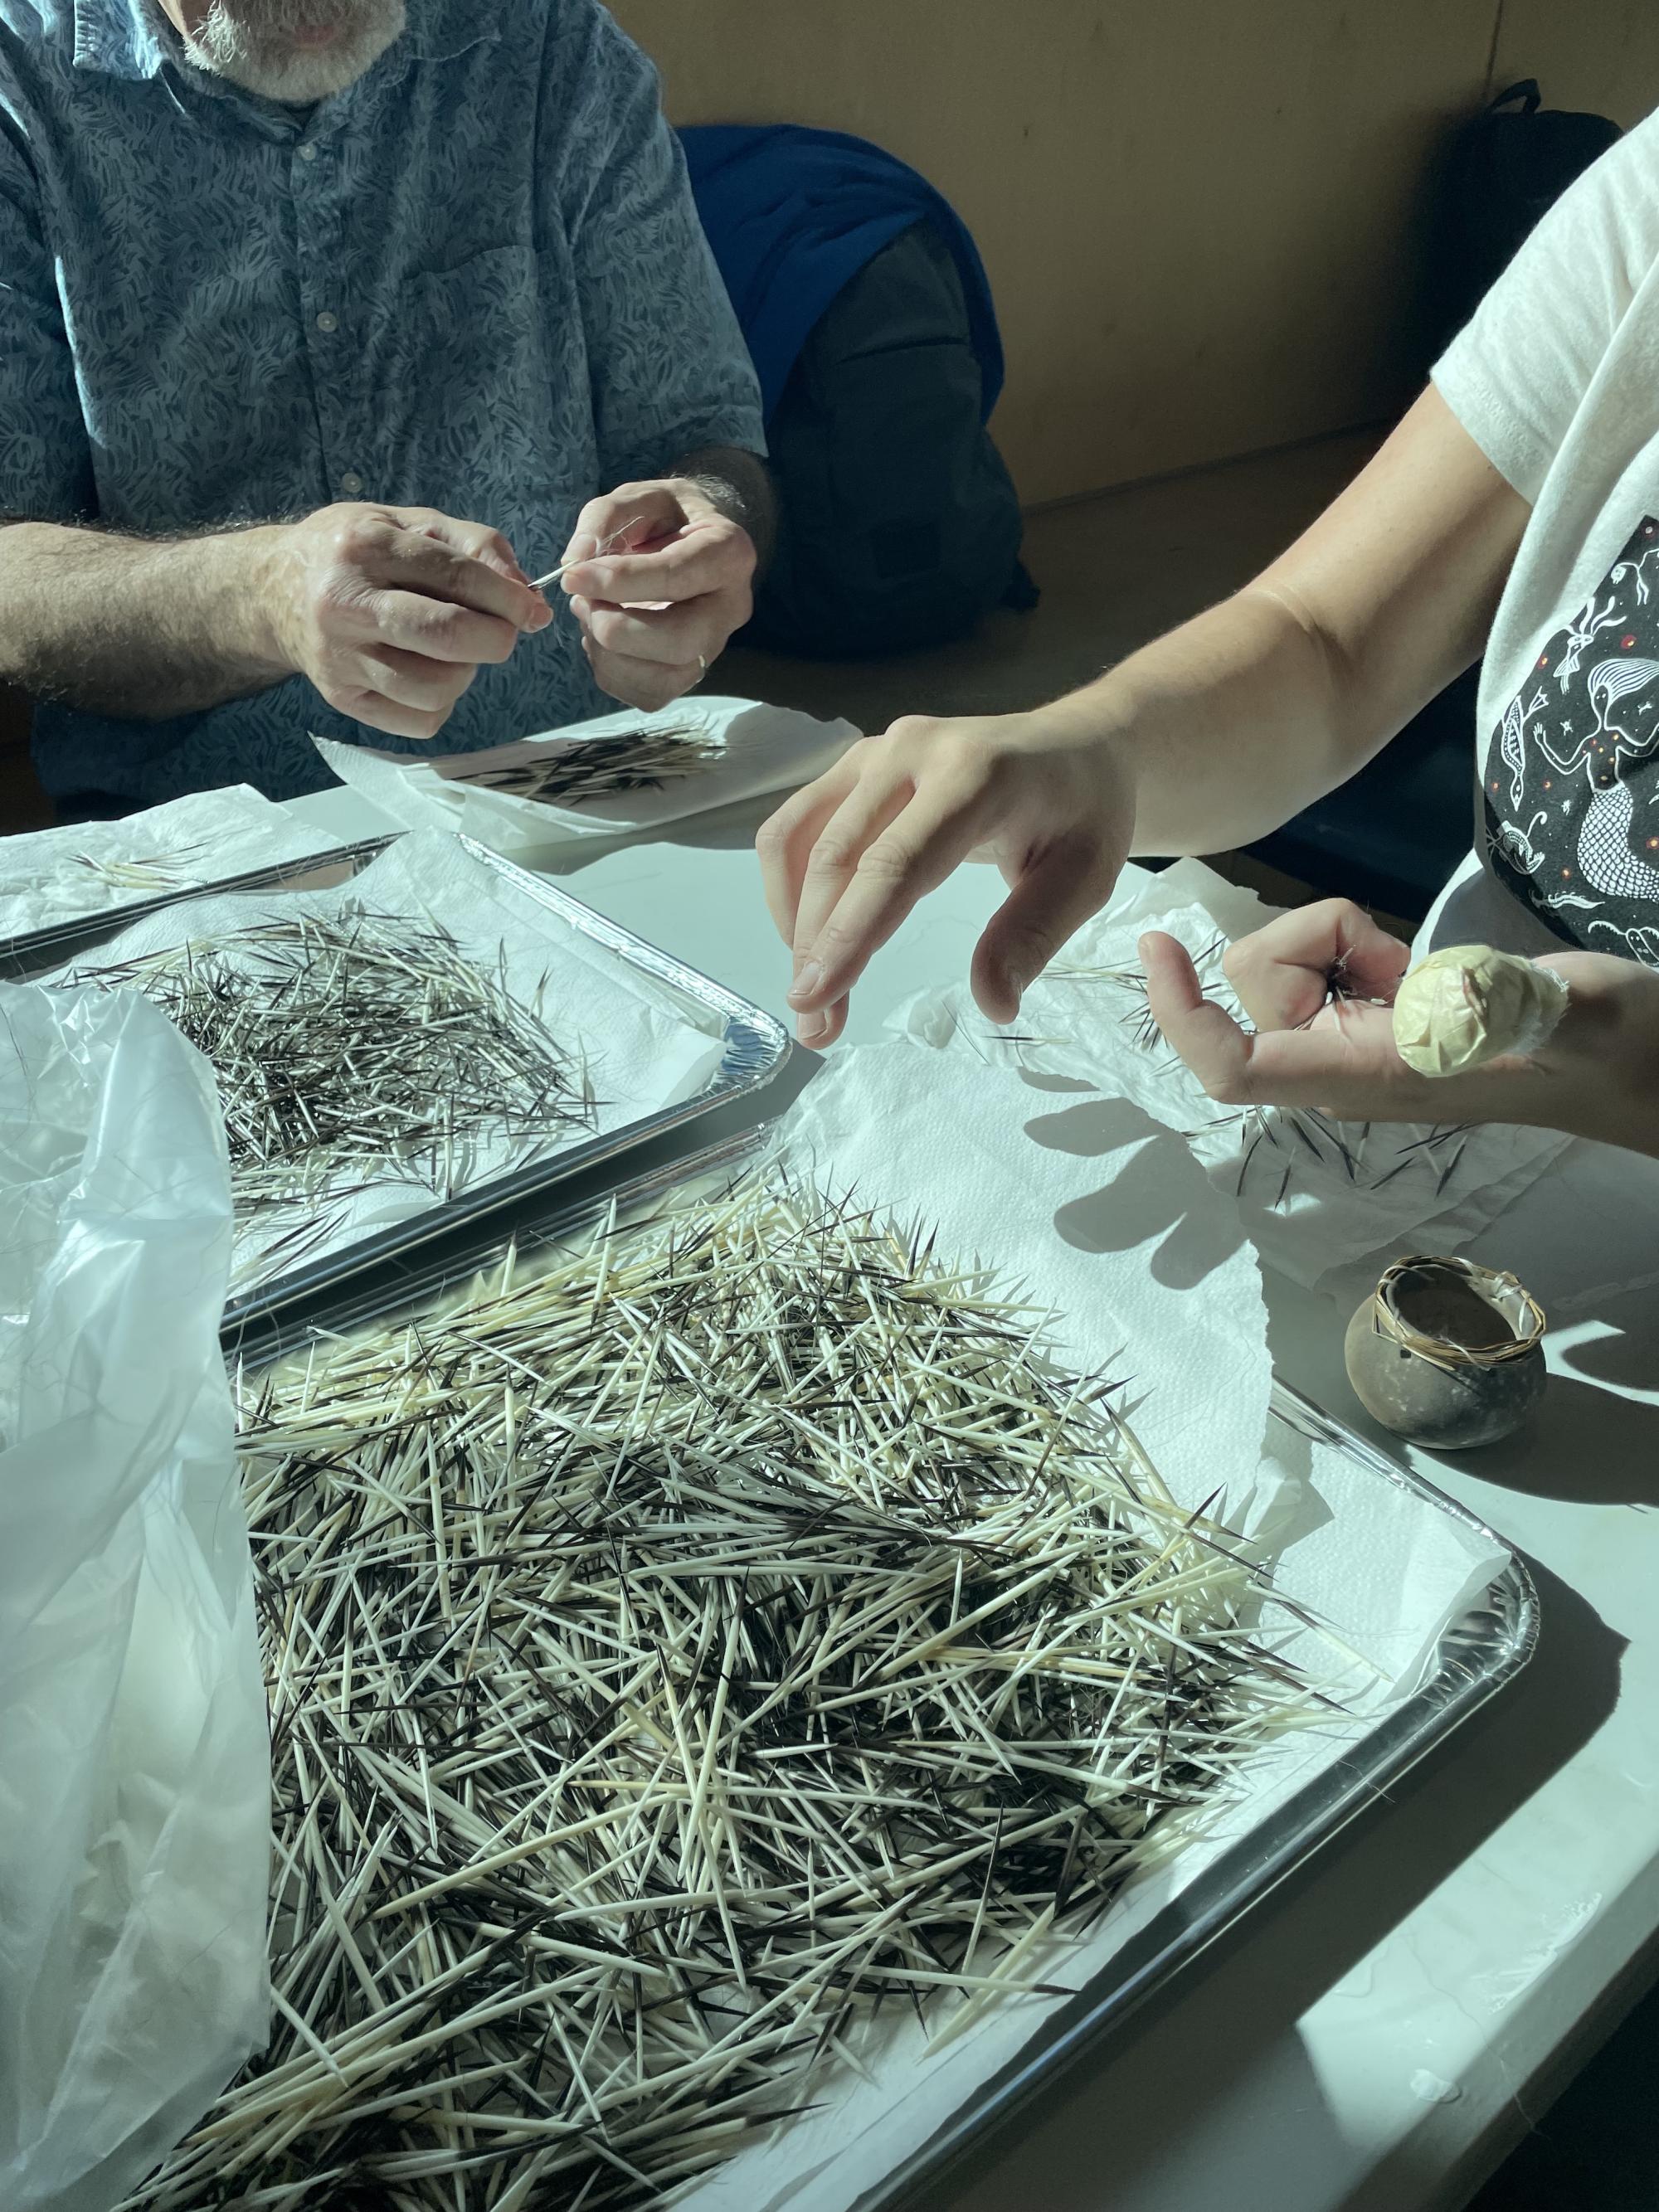 [ID: "Workshop participants sorting out hair from freshly washed porcupine quills."]